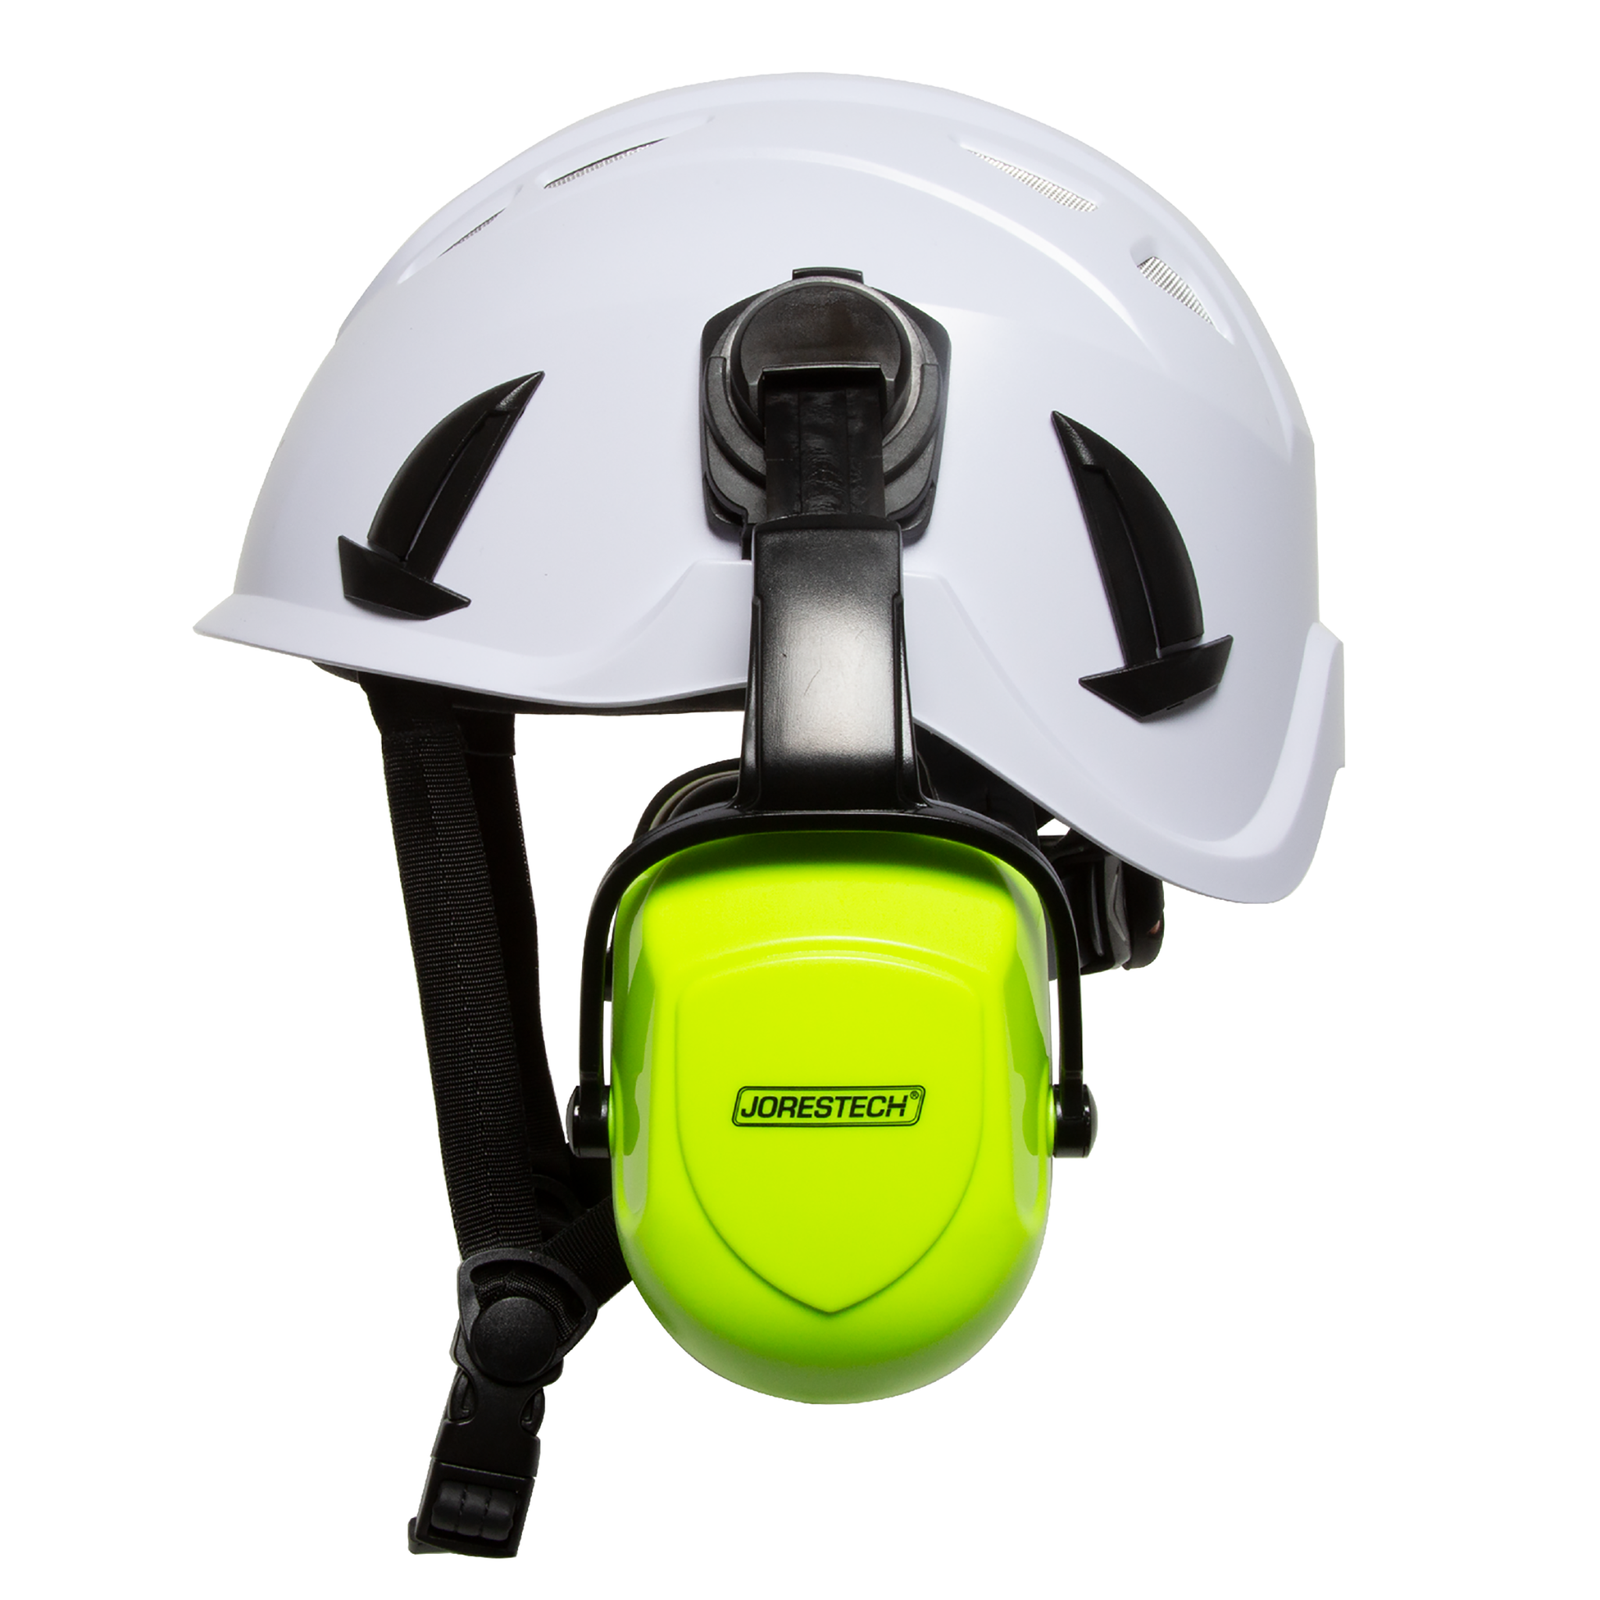 Side view of the white ventilated JORESTECH ANSI compliant hard hat with mounted lime ear muffs over white background